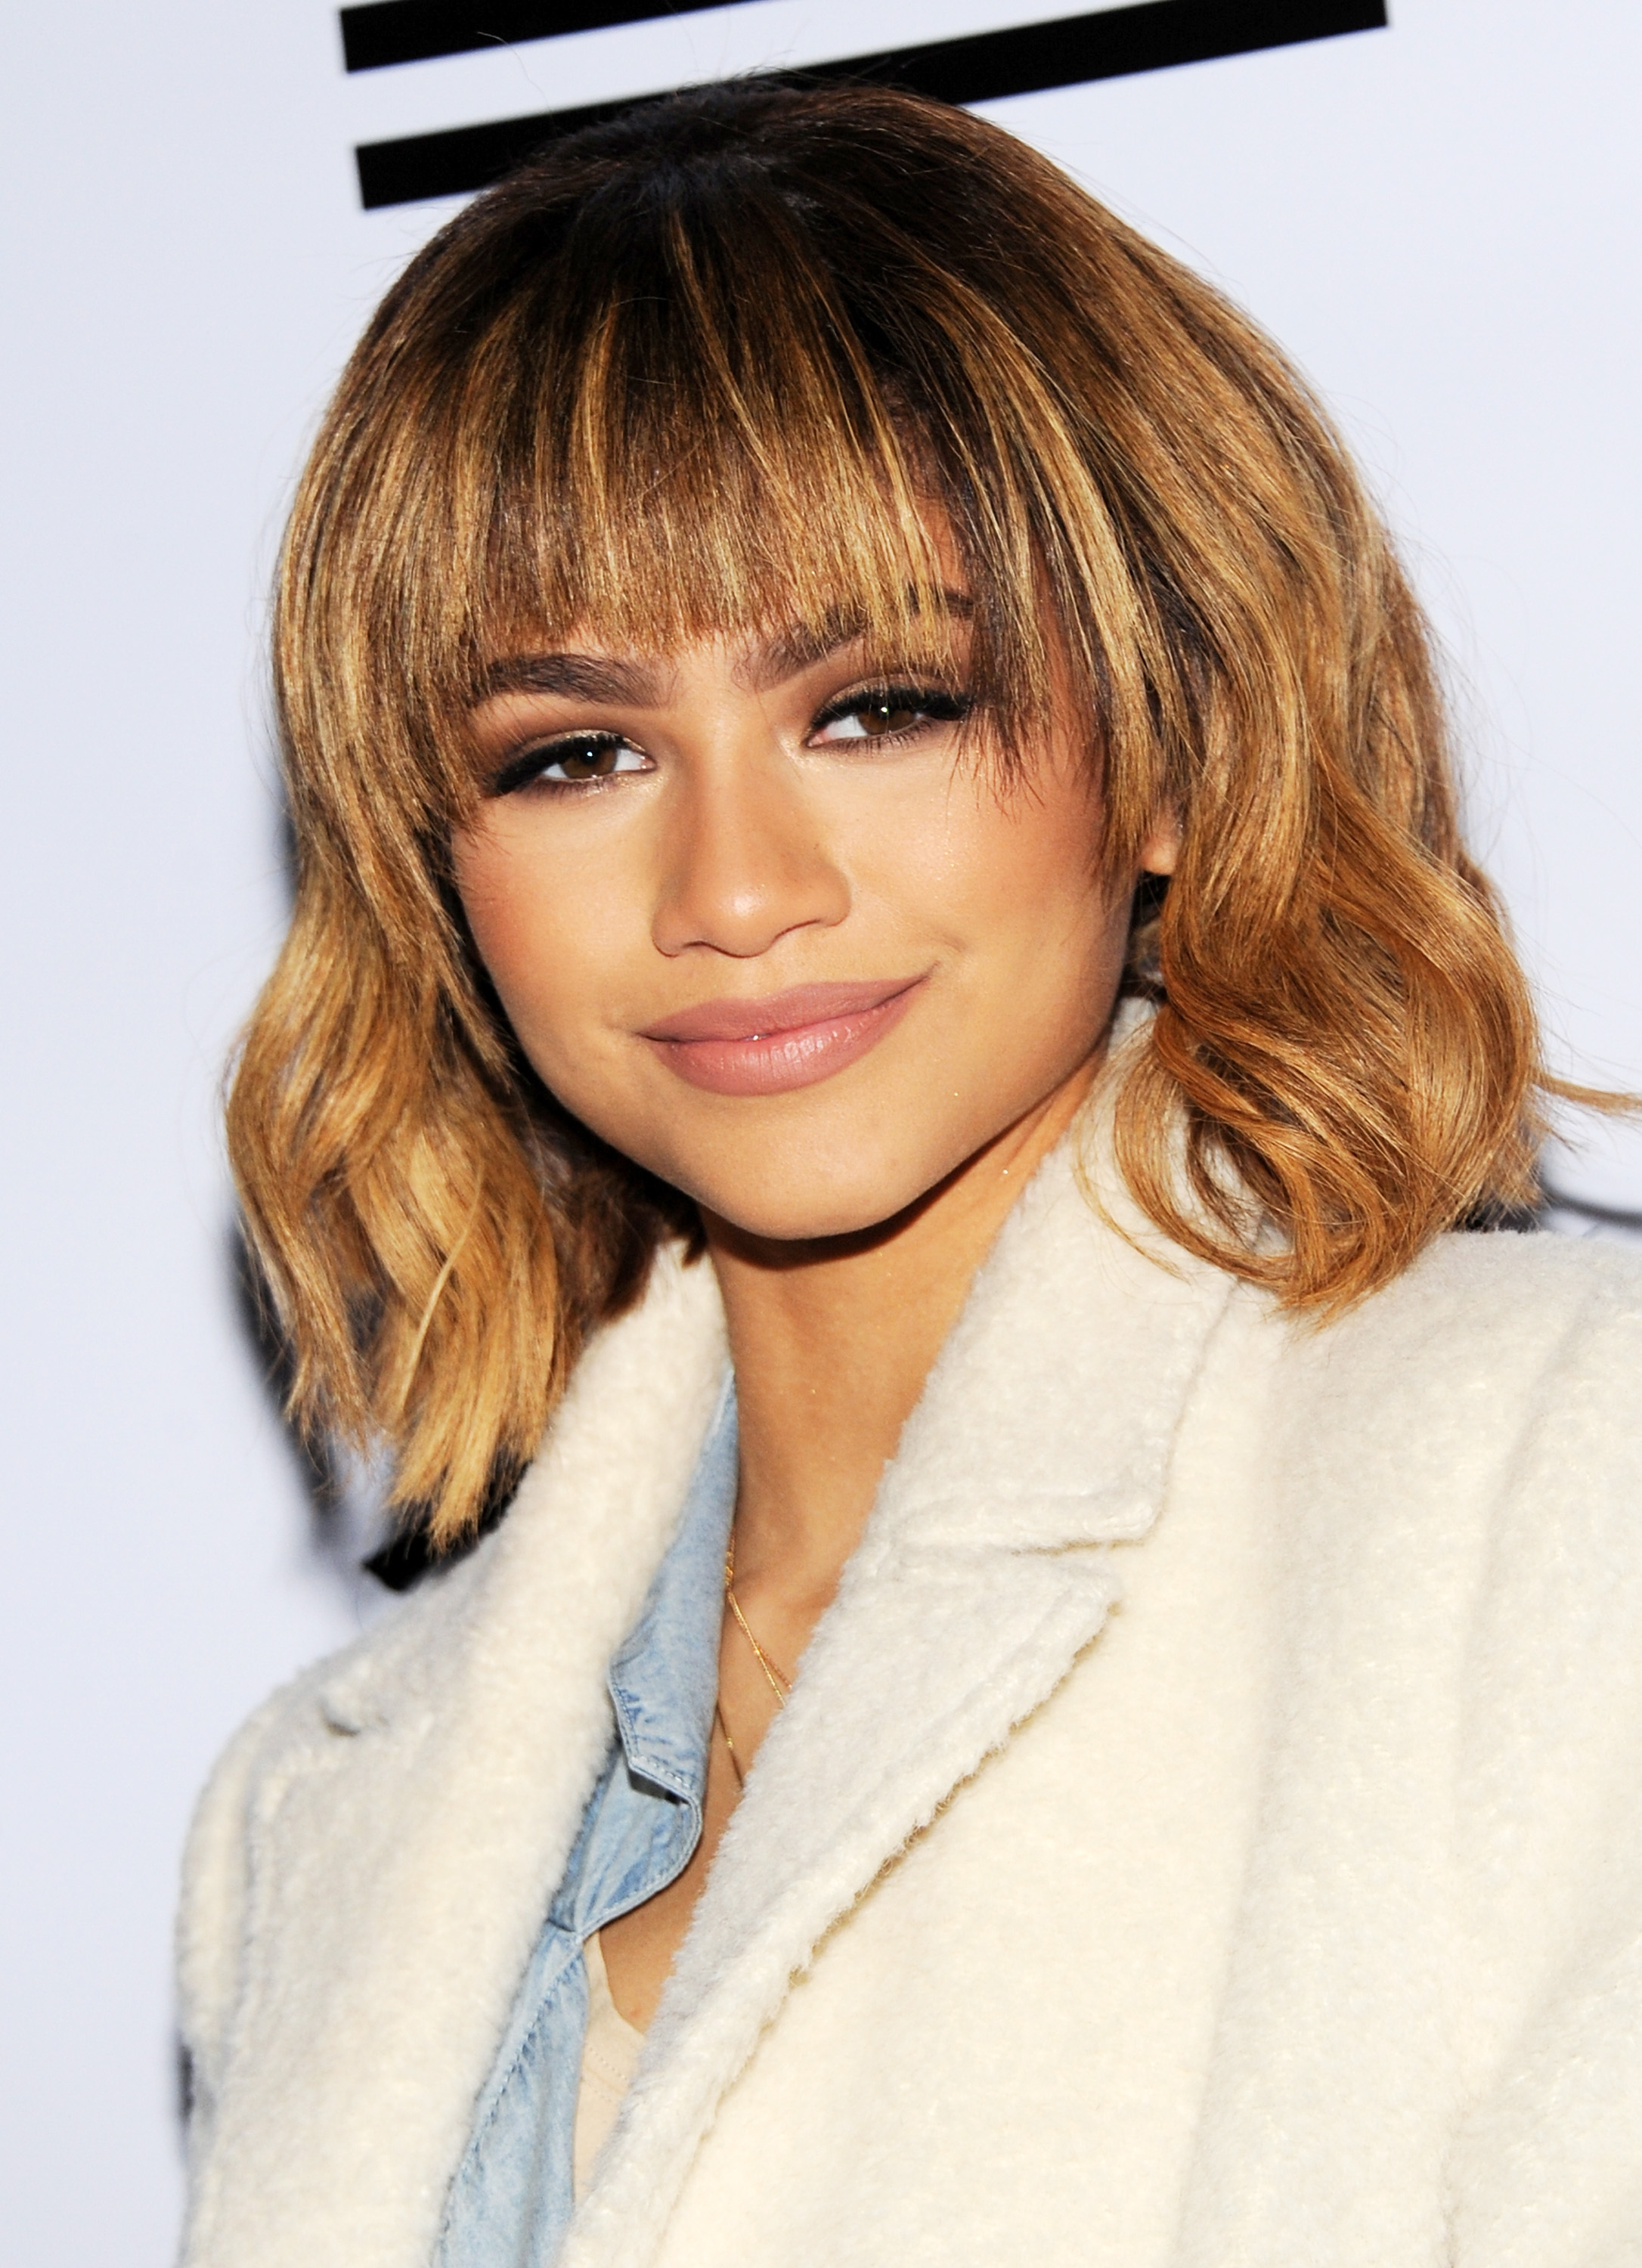 Singer/actress Zendaya attends 'Something New' Fan Event at Black Tap on February 26, 2016 in New York City.